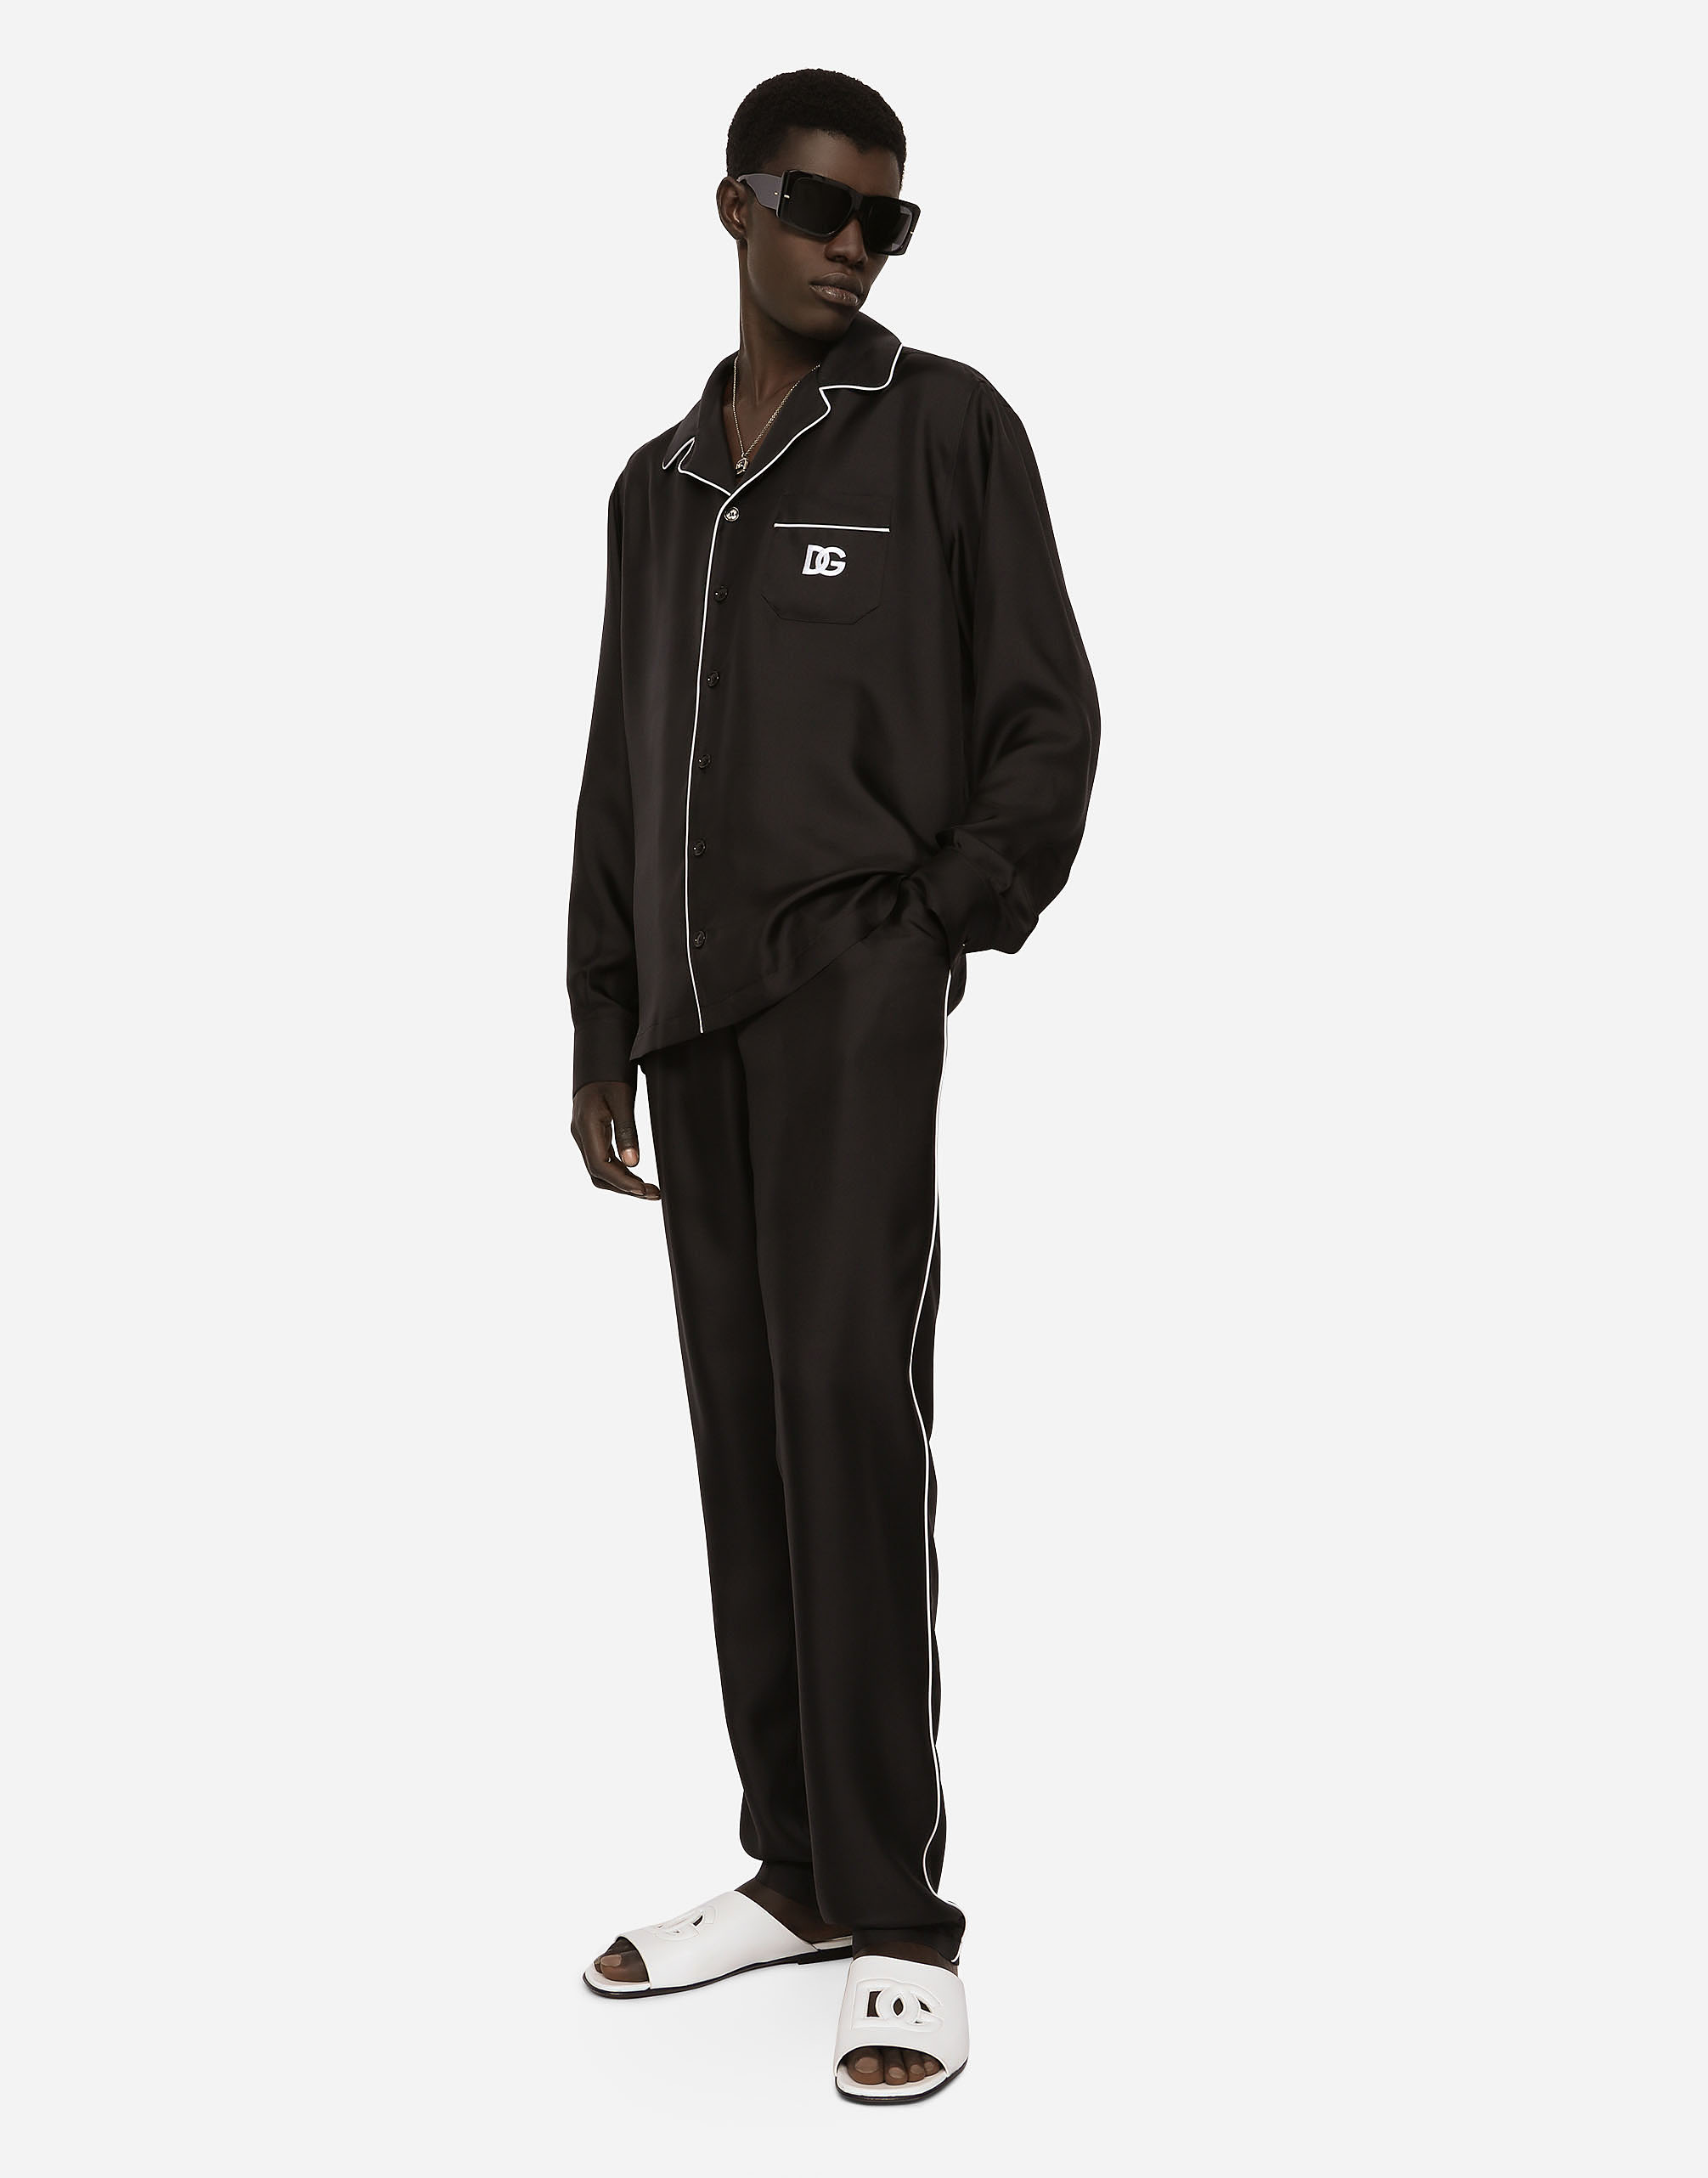 Shop Dolce & Gabbana Silk Jogging Pants With Dg Embroidered Patch In Black